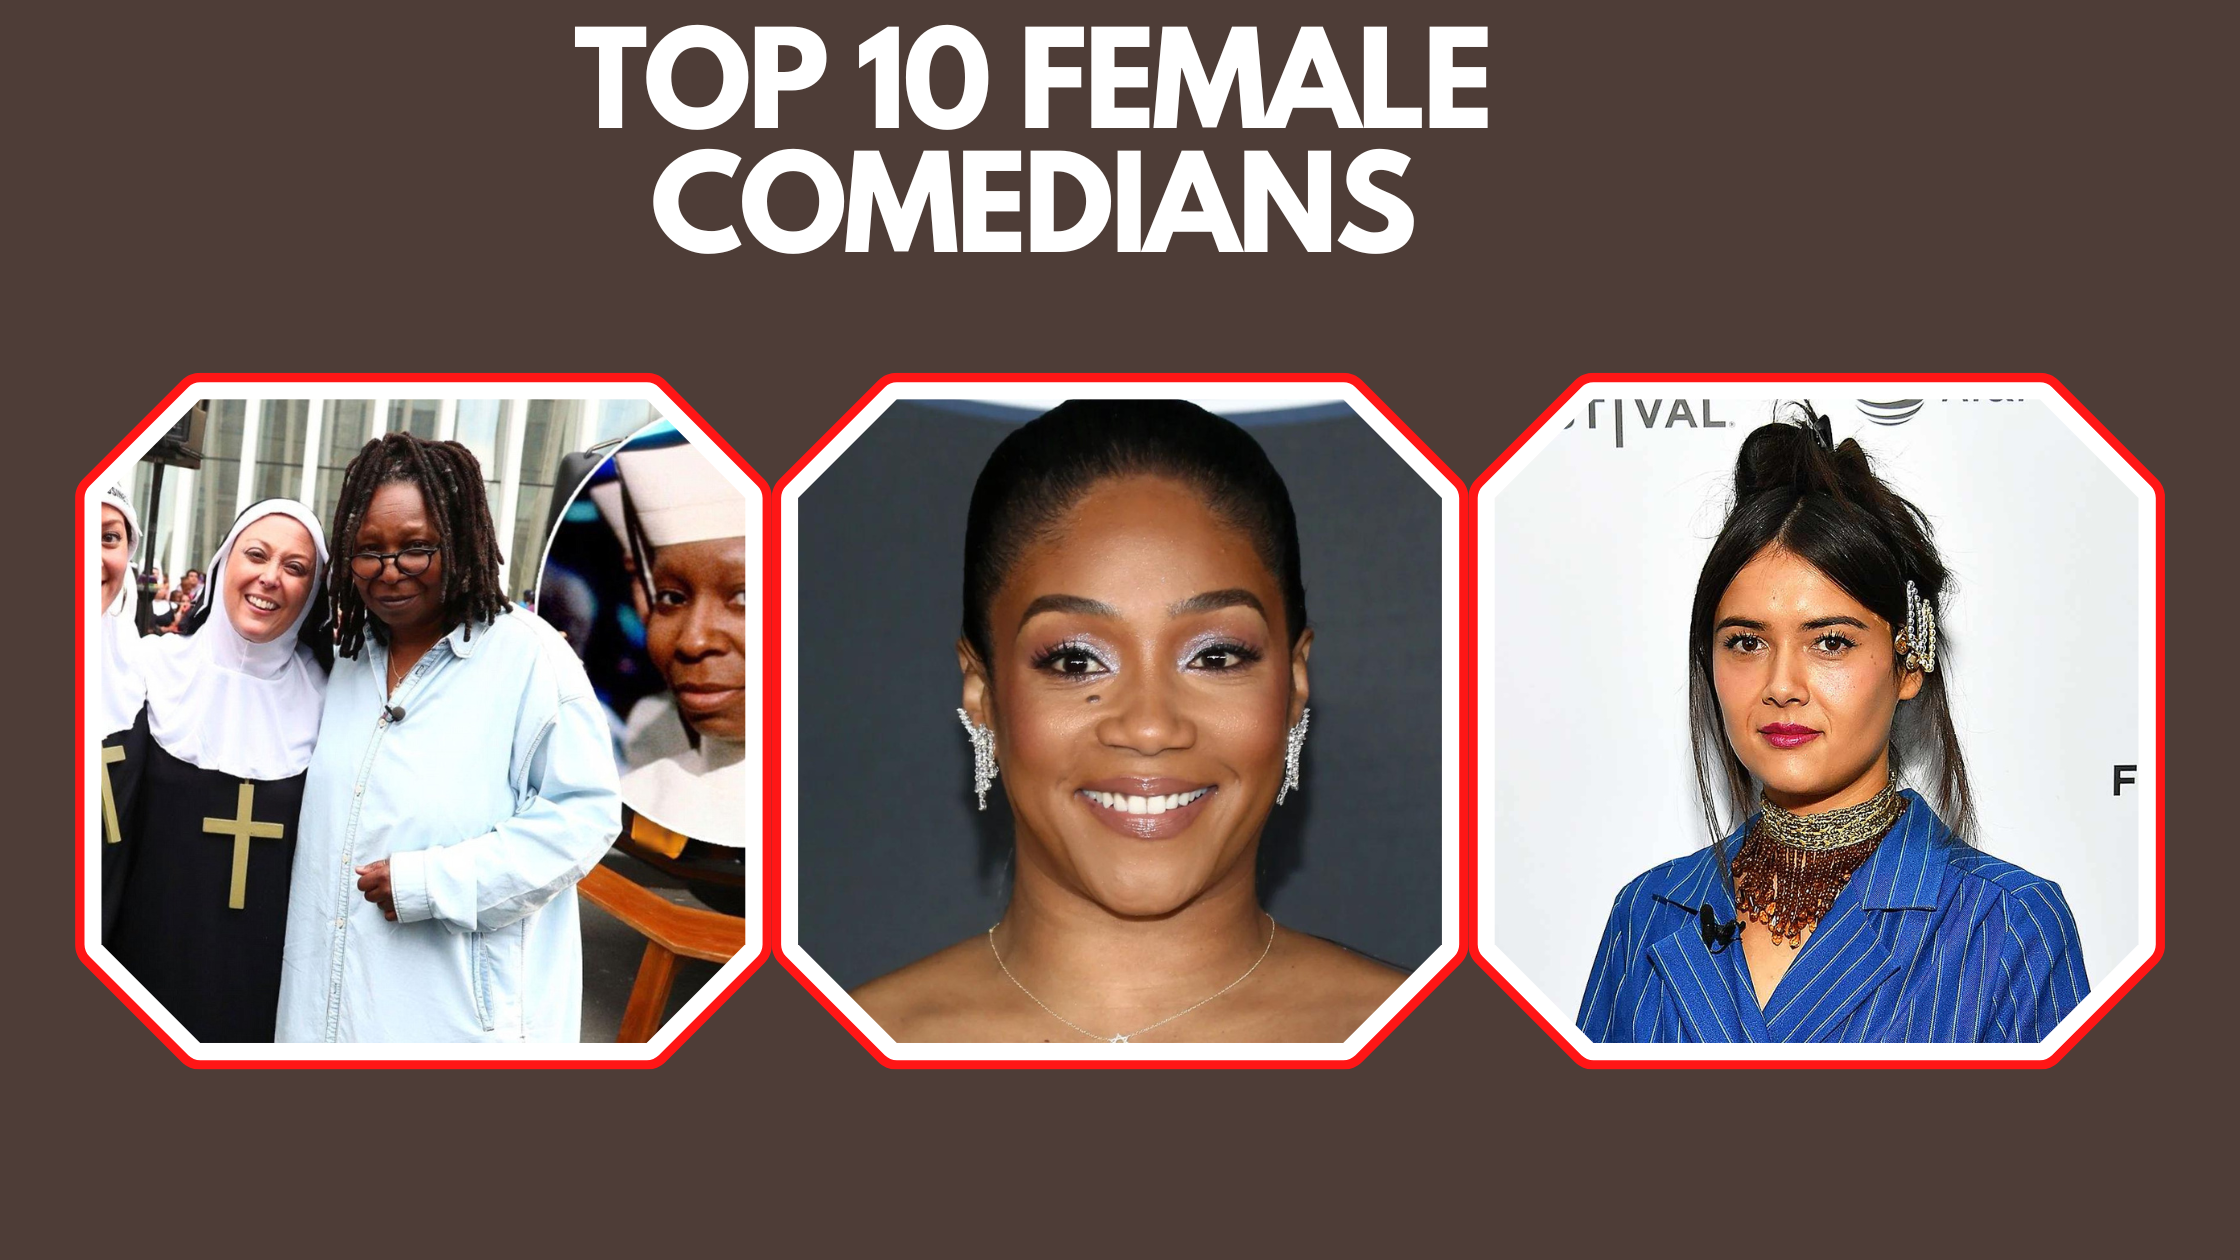 The top 10 Female Comedians